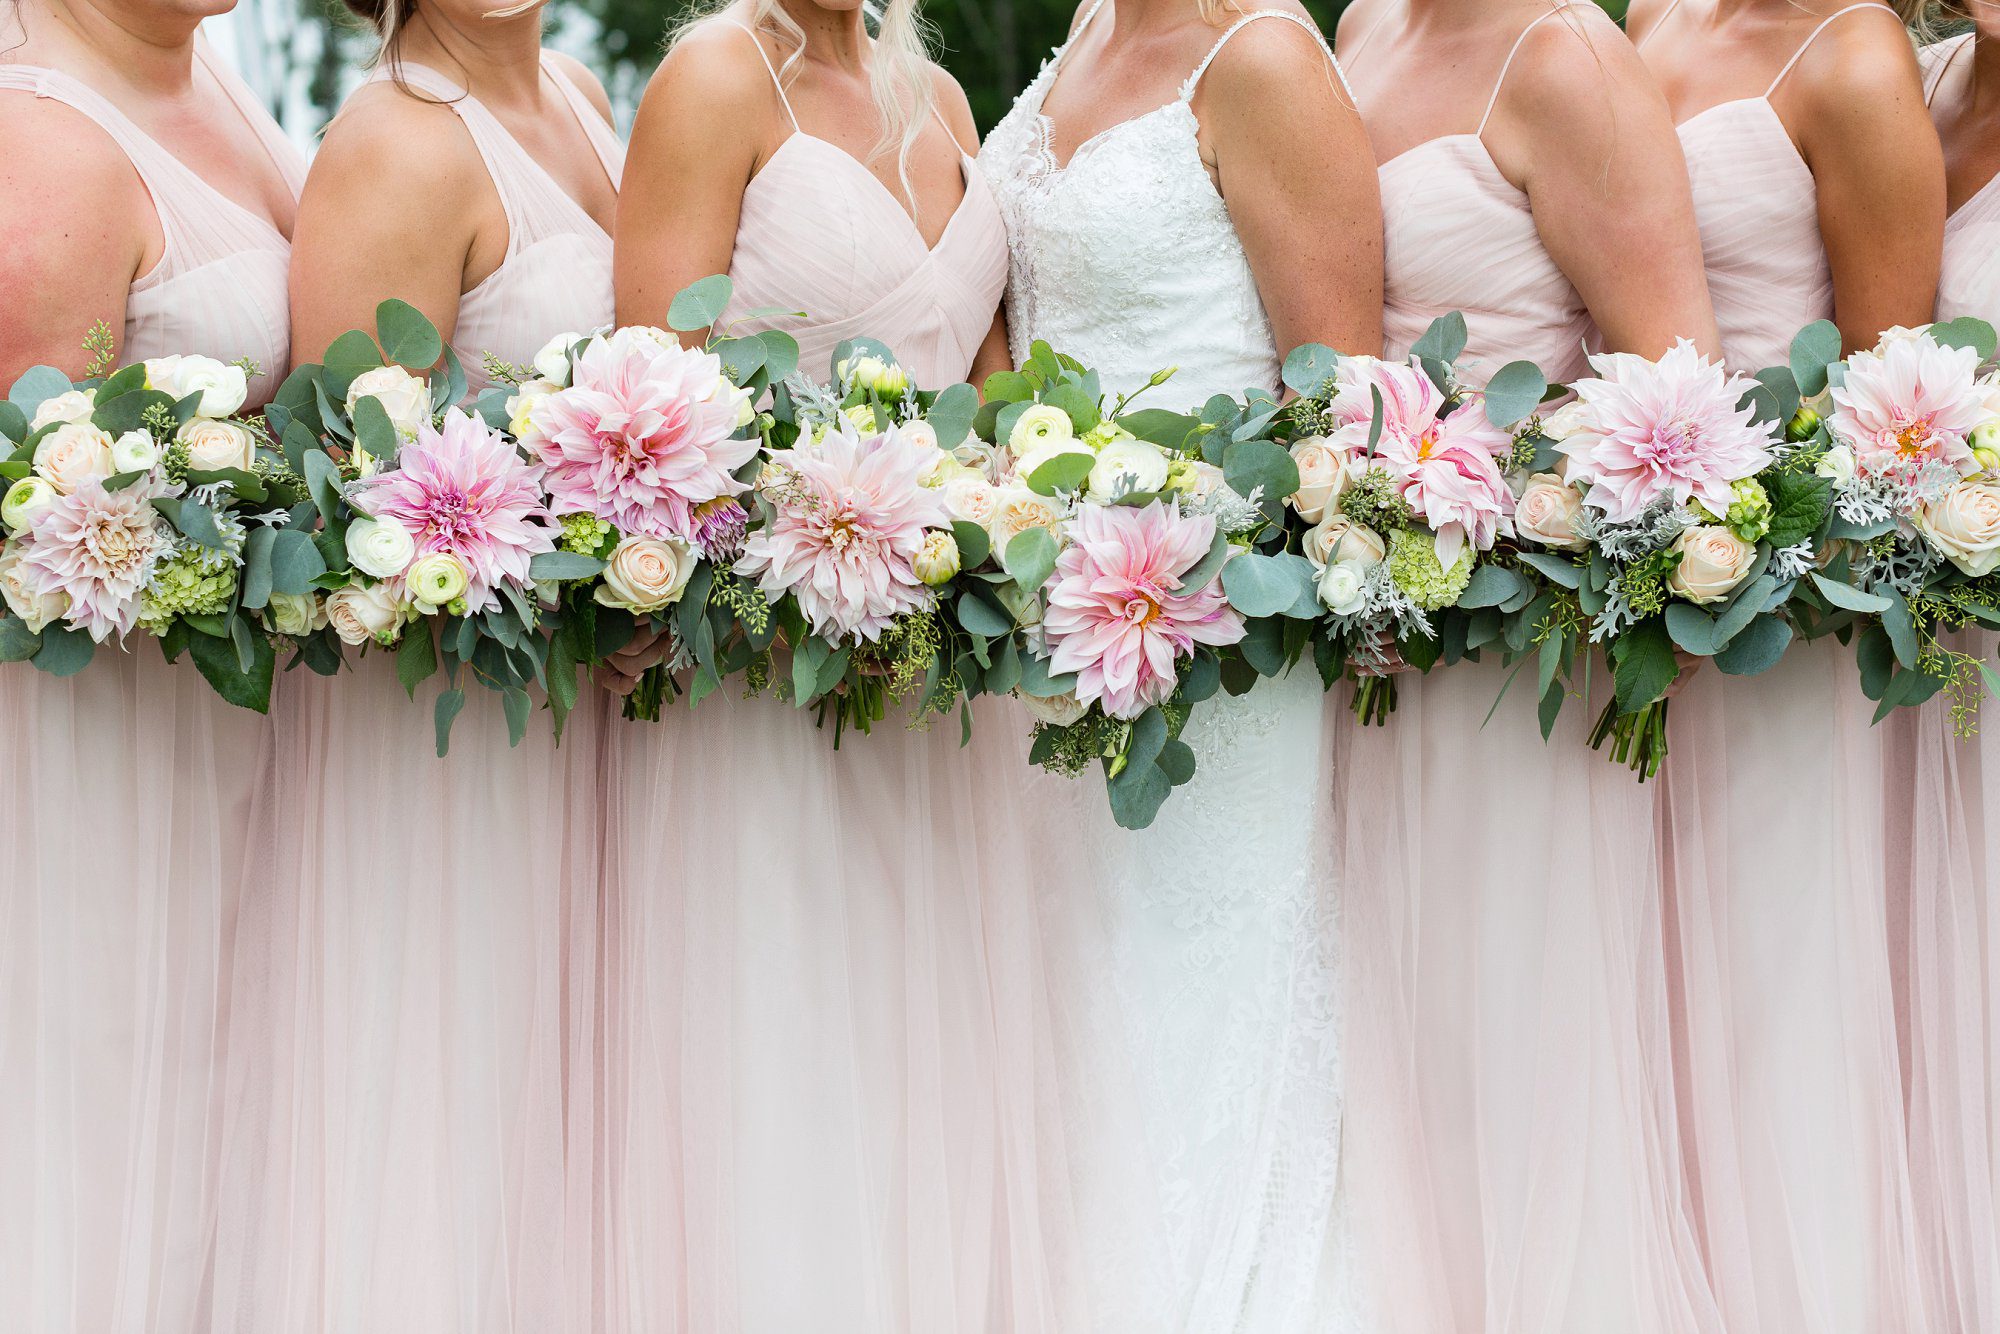 Dover NH Outdoor Wedding Pink Peonies | NH Wedding Photography